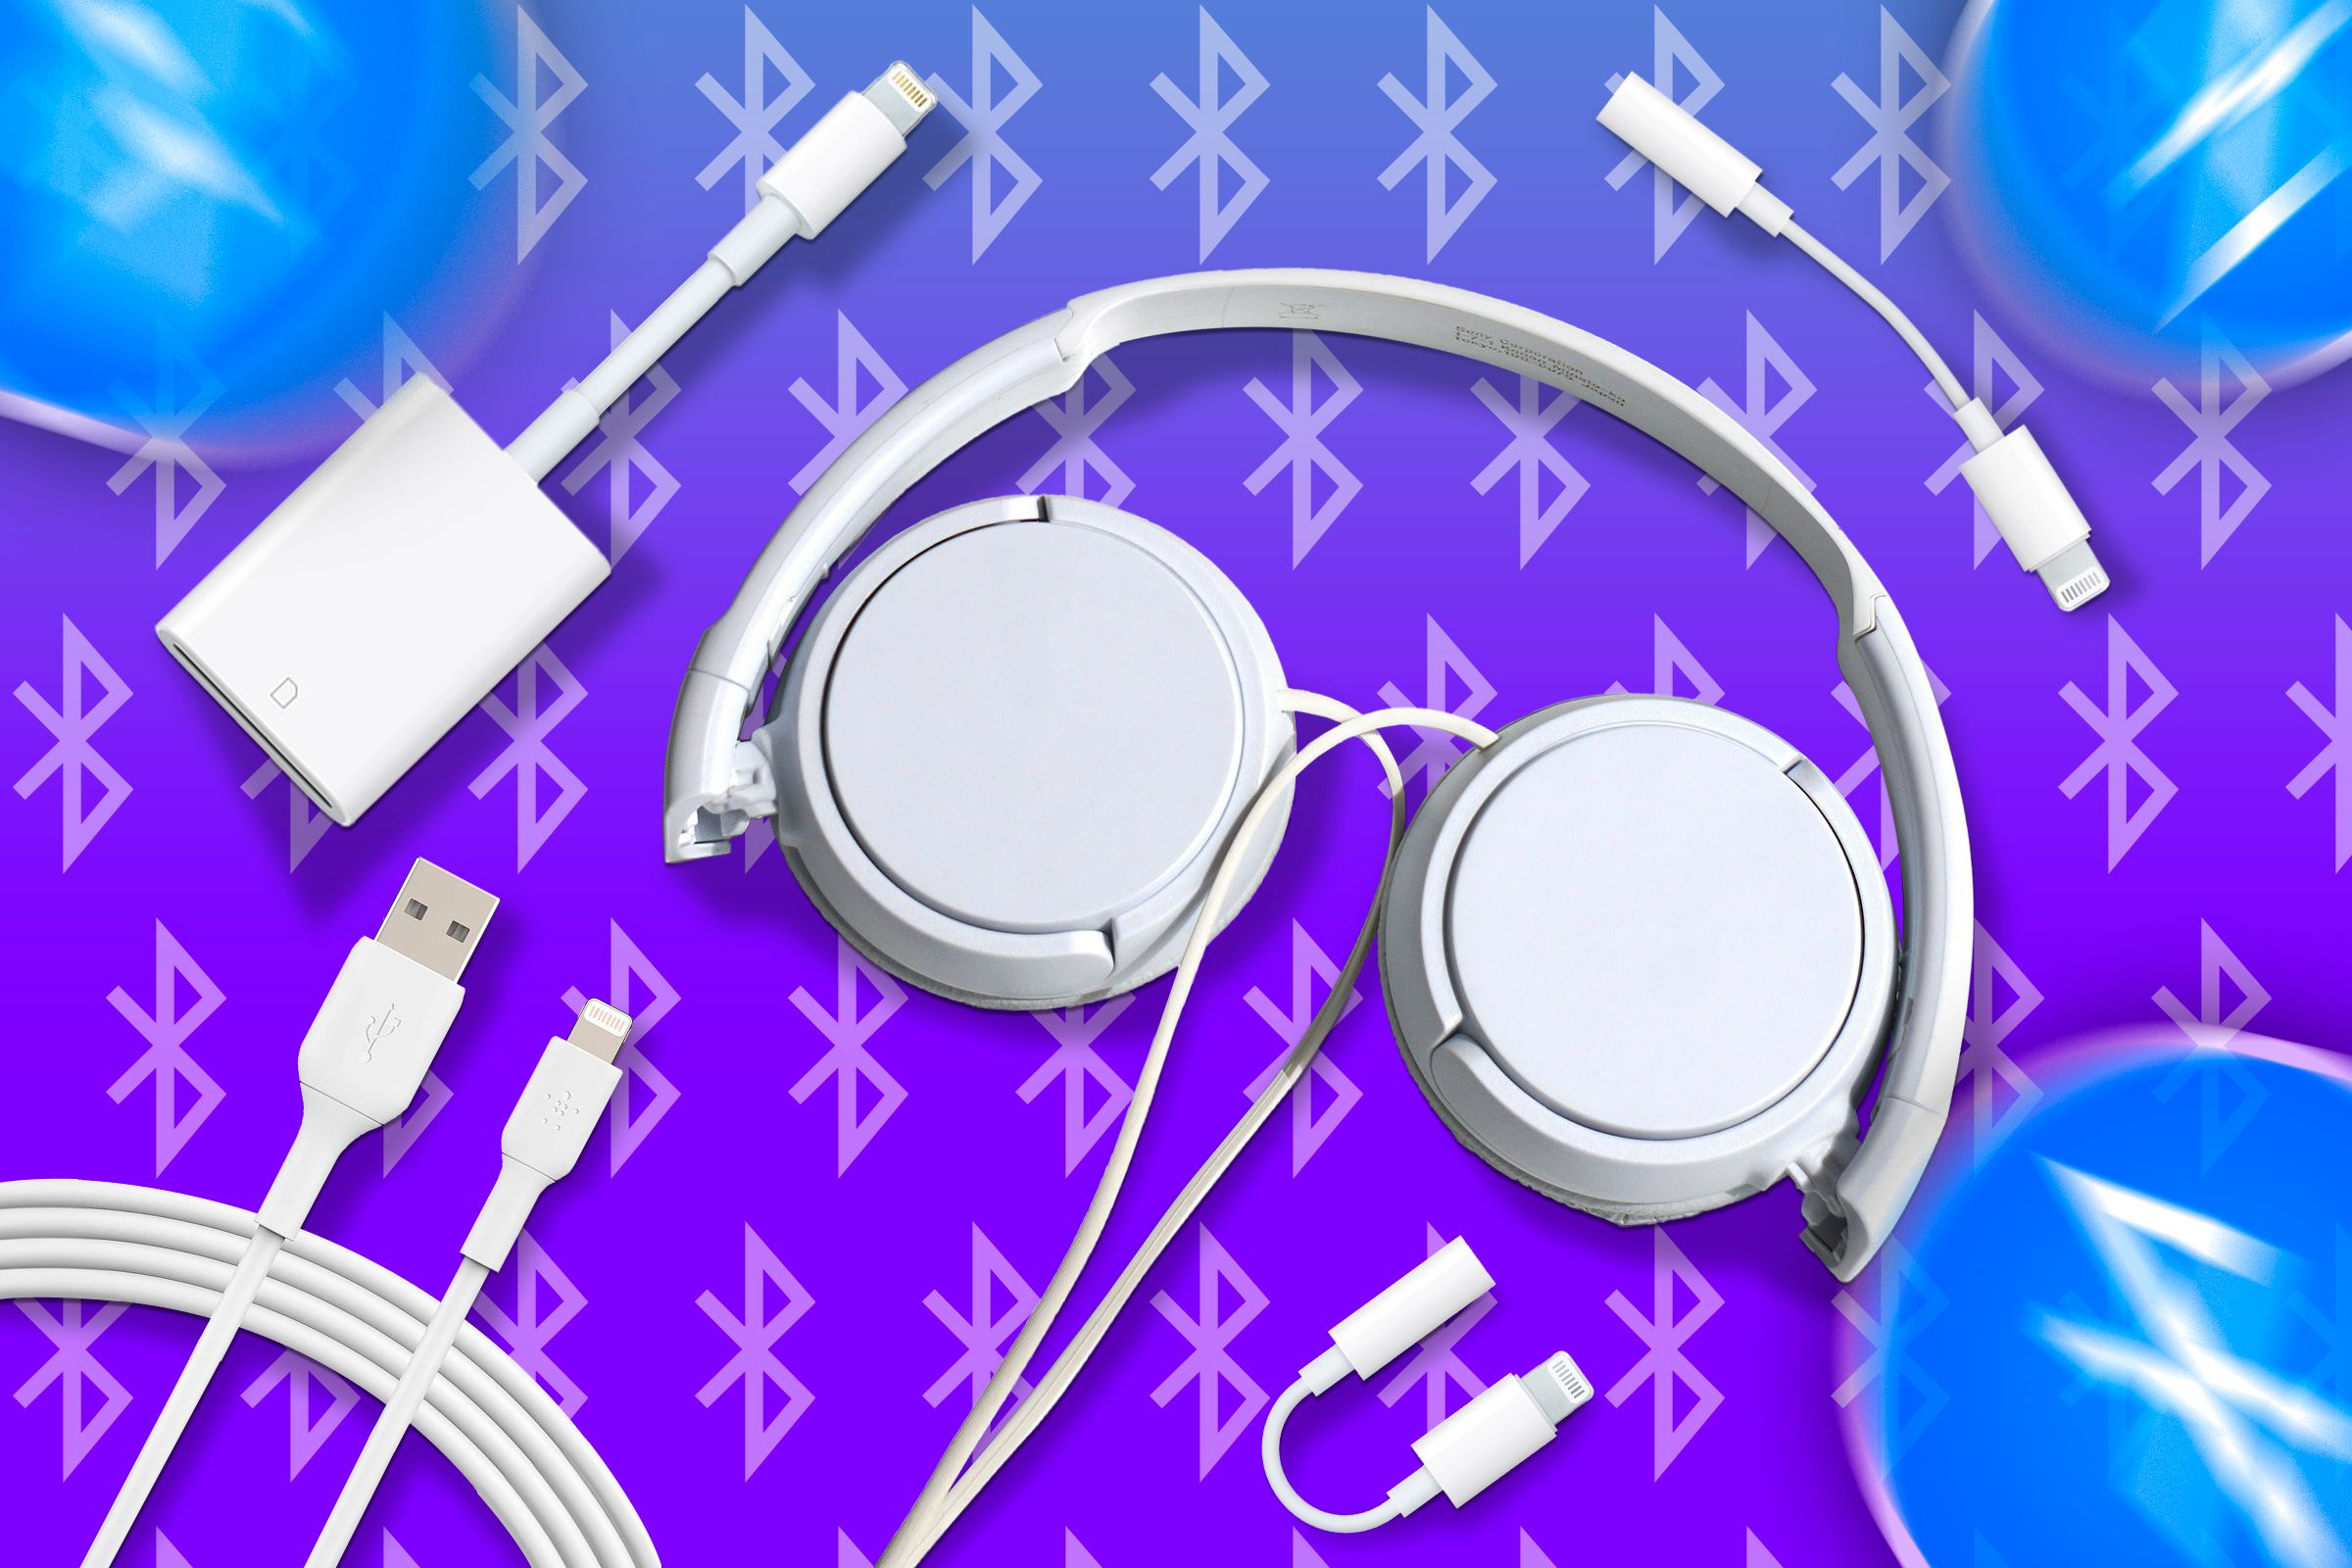 A headphone with some lightning adapters and several Bluetooth icons in the background.